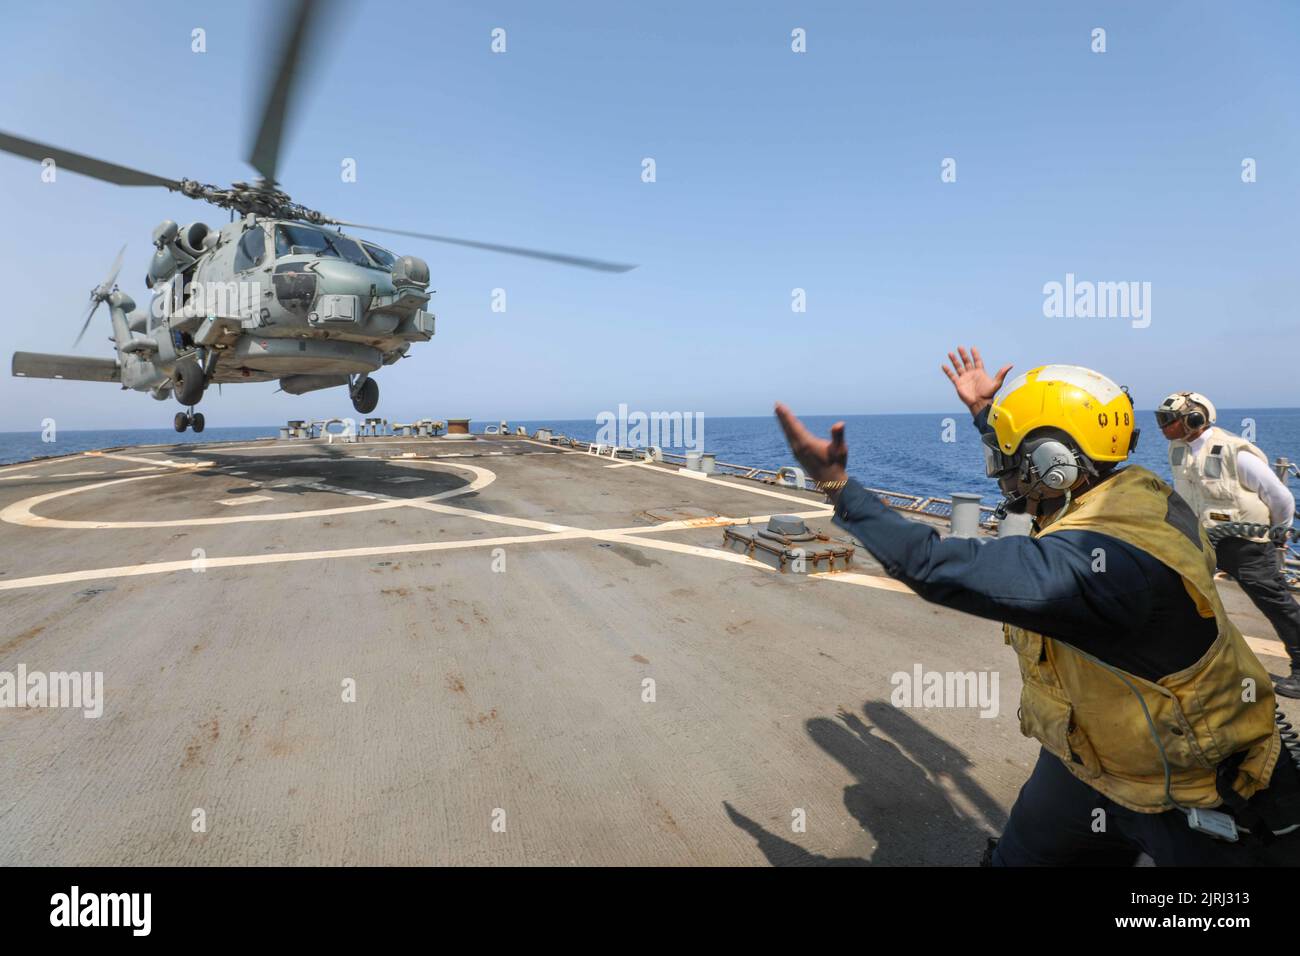 220818-N-CS075-1017 MEDITERRANEAN SEA (August, 18, 2022) Boatswain’s Mate 2nd Class Jerome Carlie, from Augusta, Georgia, signals to an MH-60S Seahawk helicopter, attached to the “Dragonslayers” of Helicopter Sea Combat Squadron (HSC) 11, aboard the Arleigh Burke-class guided-missile destroyer USS Cole (DDG 67) in the Mediterranean Sea, August 18, 2022. Cole is part of the Harry S. Truman Carrier Strike Group and is on a scheduled deployment in the U.S. Naval Forces Europe area of operations, employed by U.S. Sixth Fleet to defend U.S., allied and partner interests. (U.S. Navy Photo by Mass Co Stock Photo